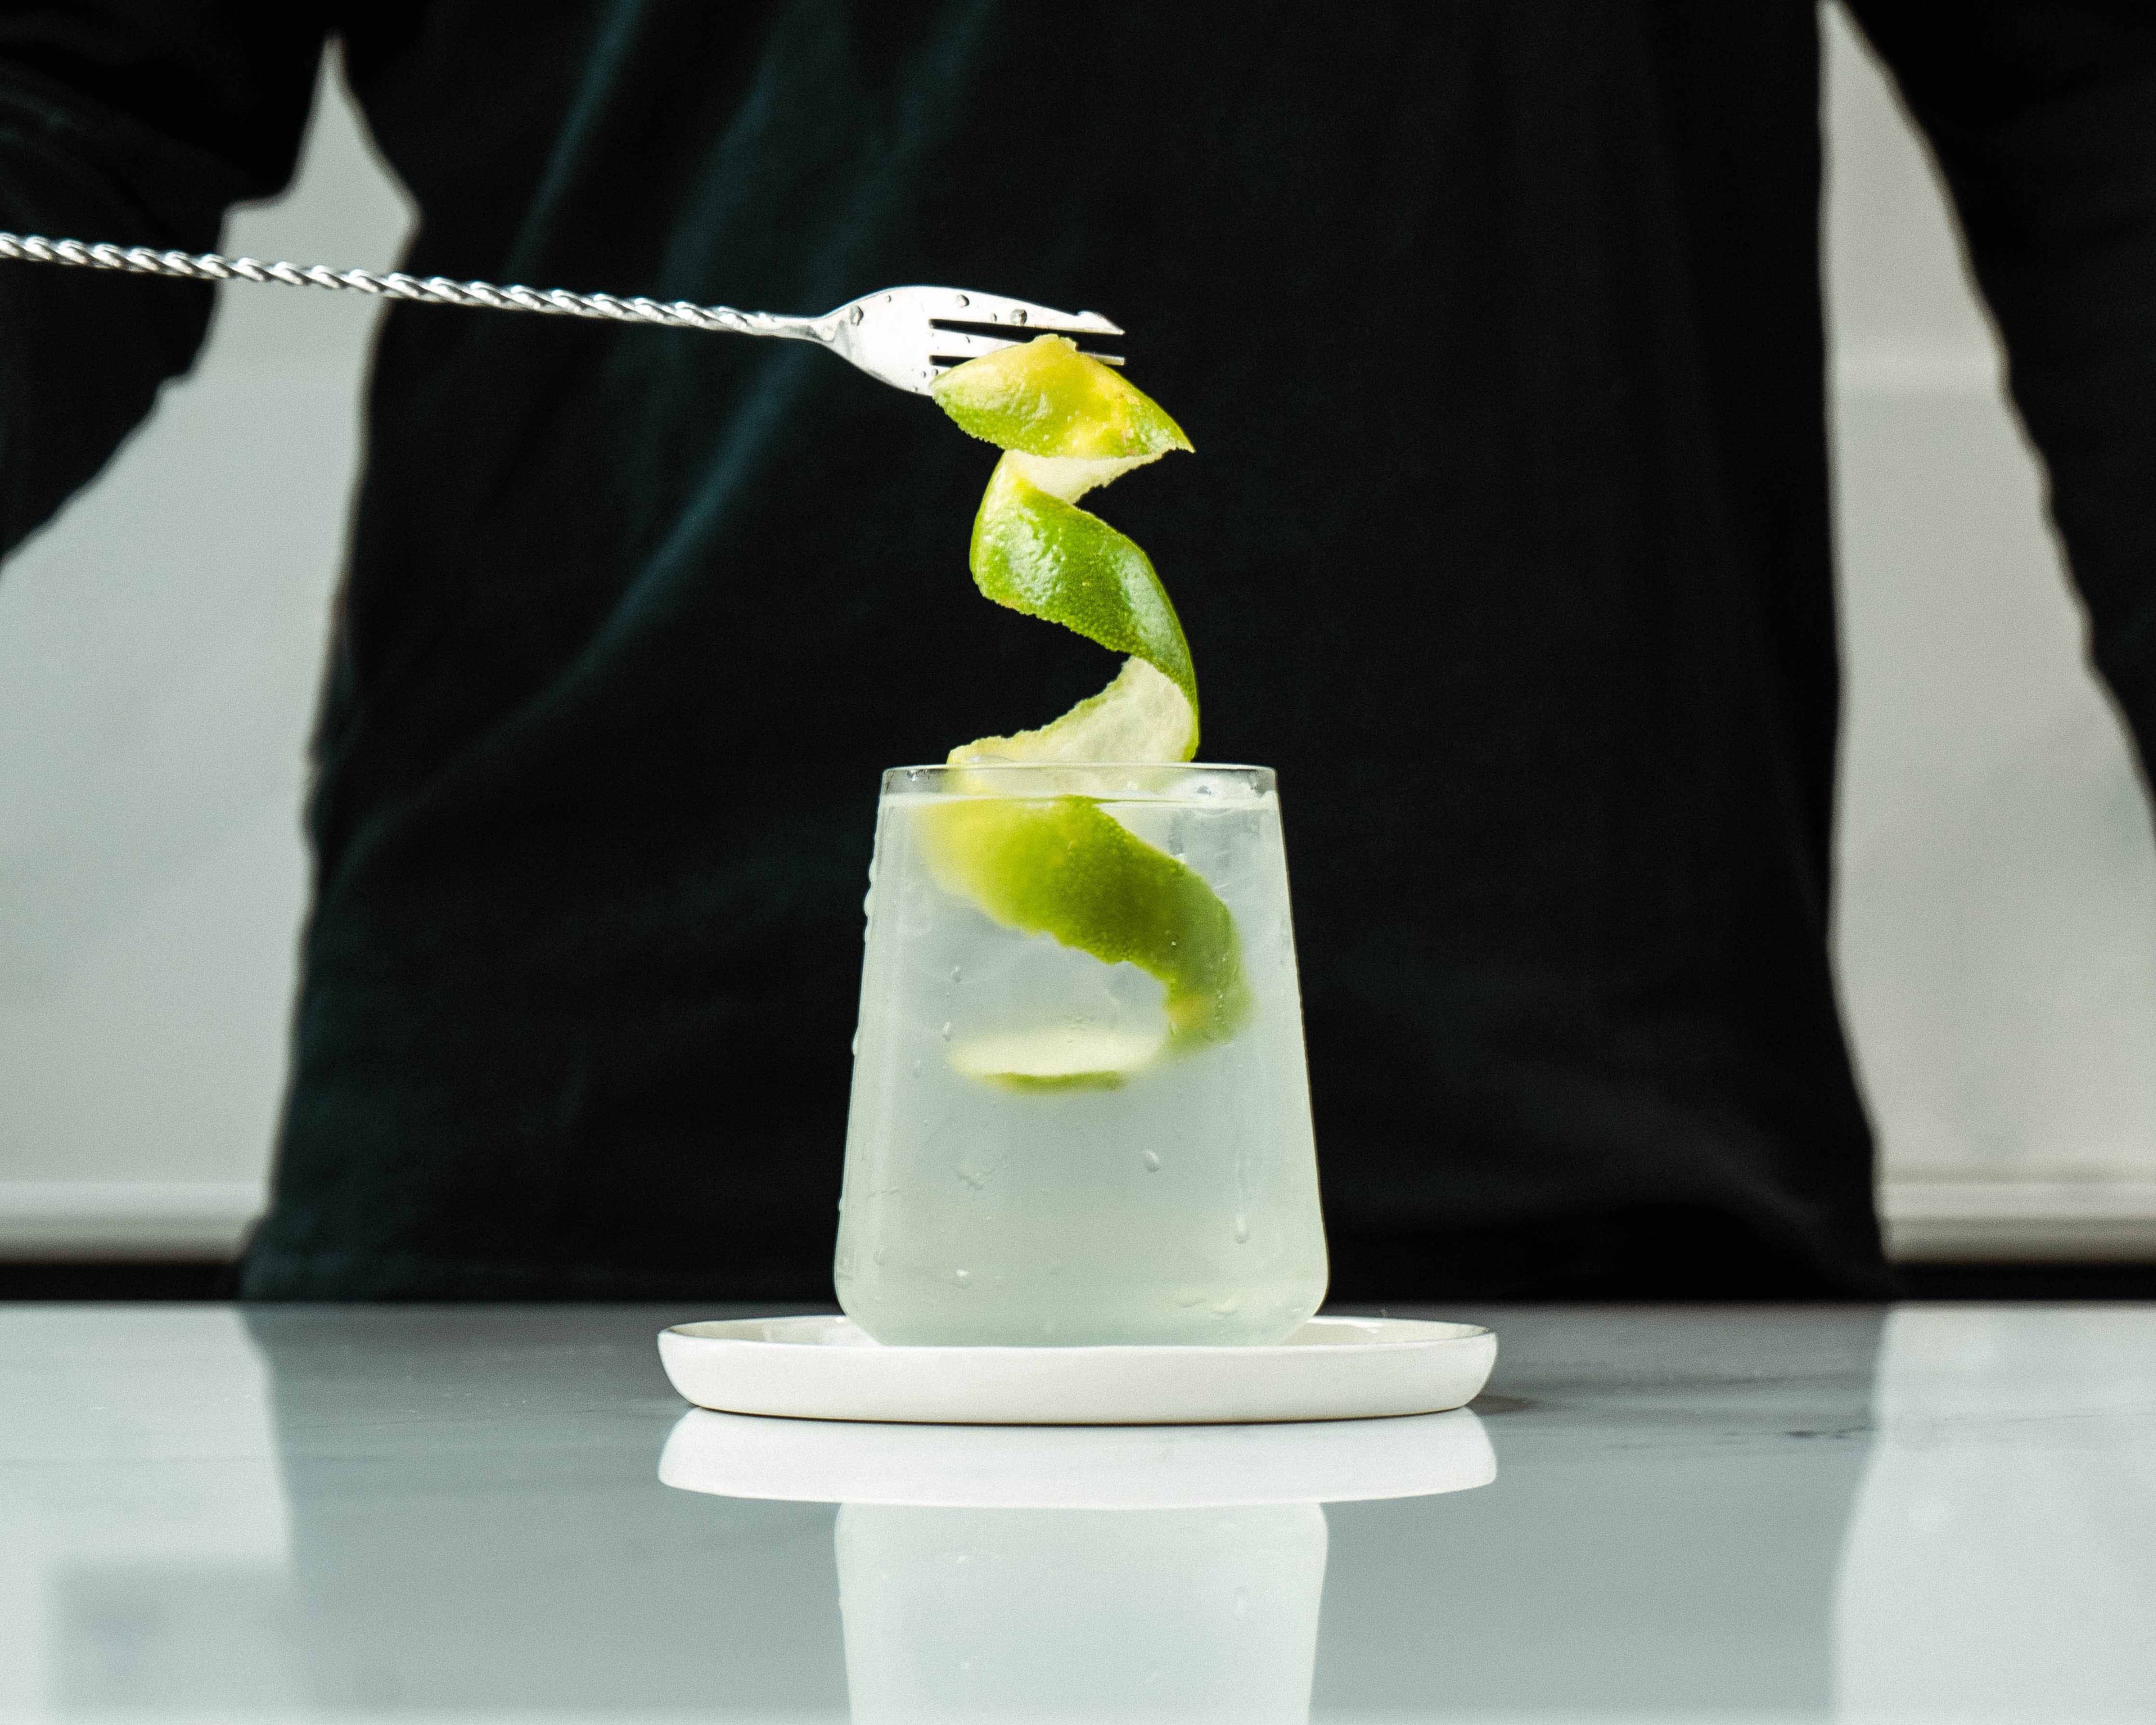 Perfect lime peel in Gin and tonic